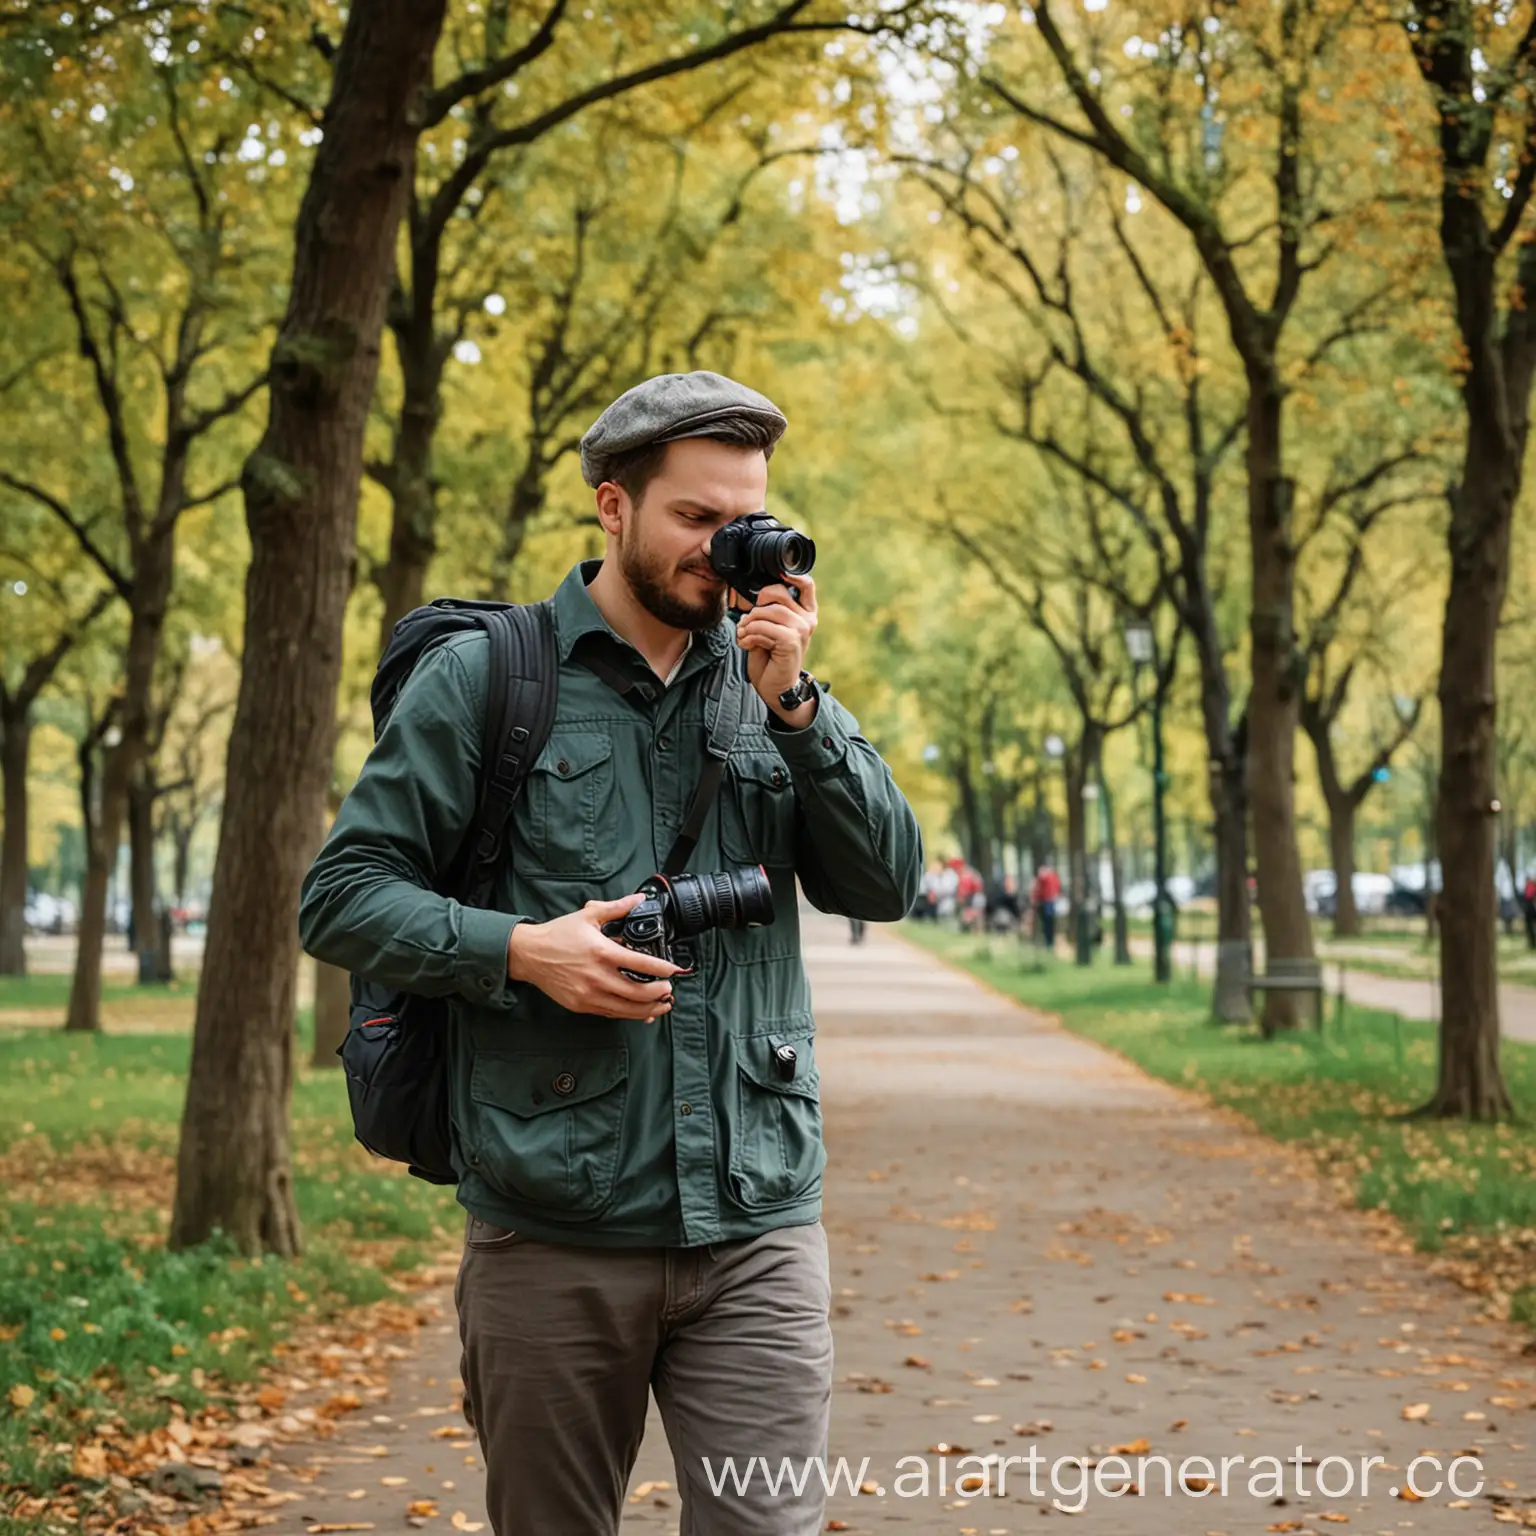 Tourist-Photographer-Walking-in-Park-Capturing-Scenic-Beauty